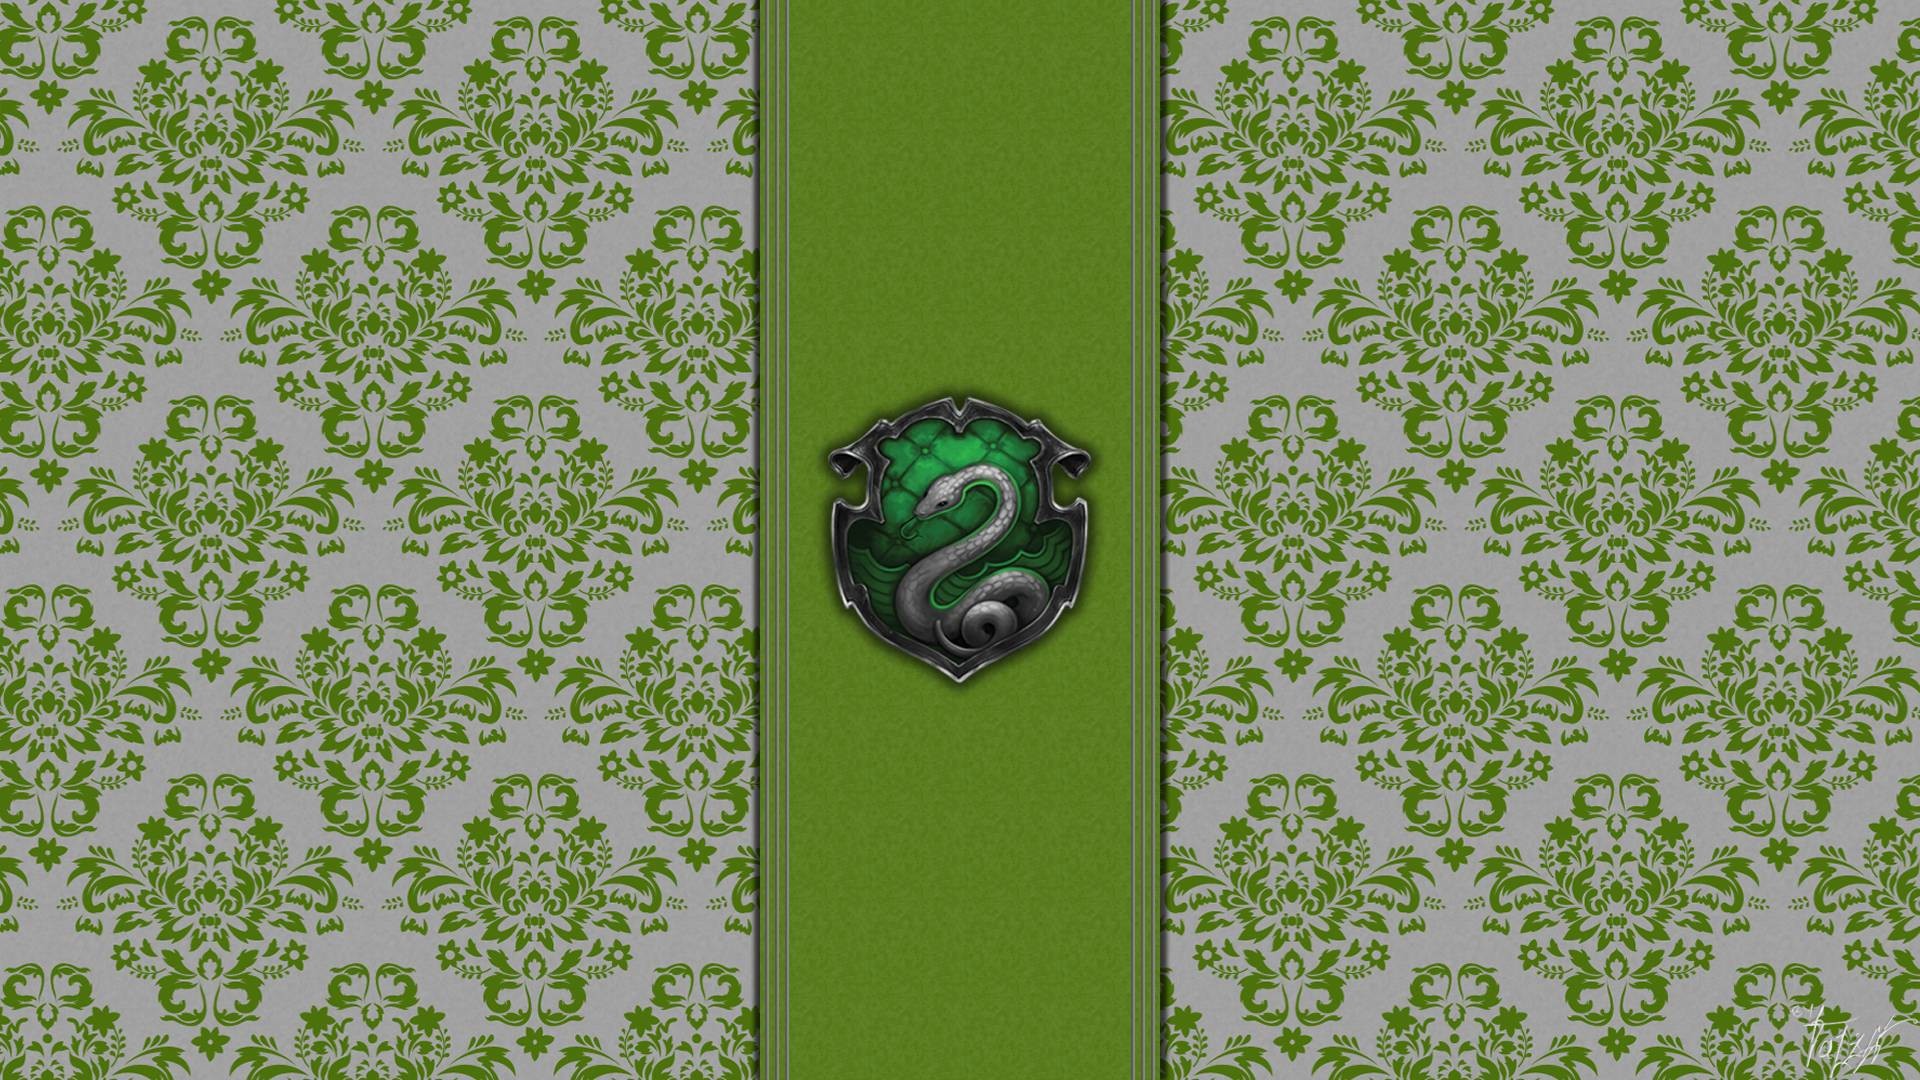 1920x1080 Wallpaper for all the Slytherins | Slytherin | Pinterest